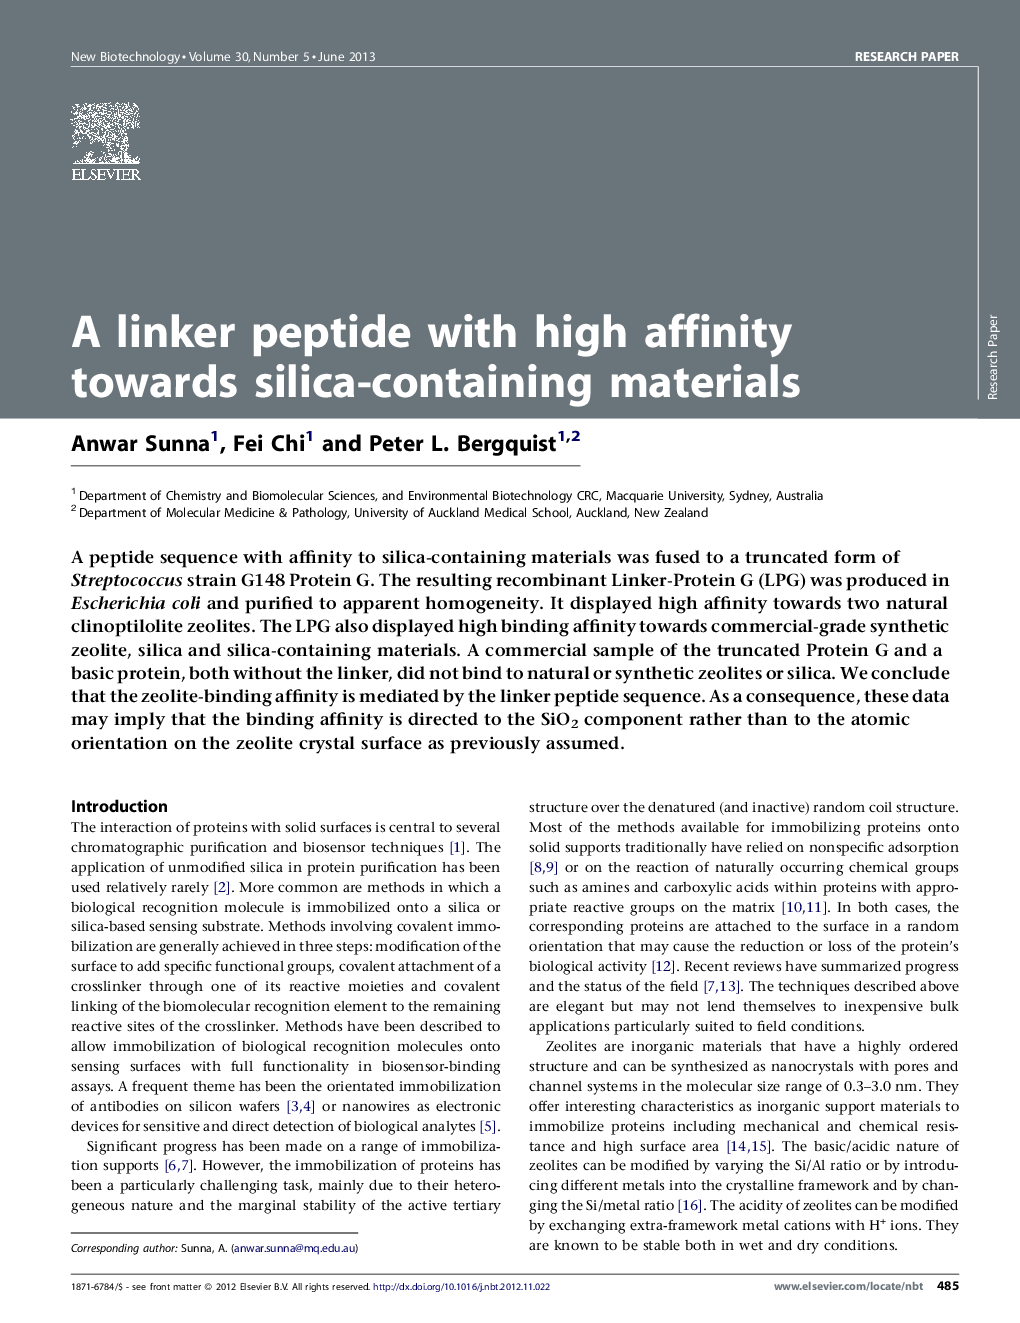 A linker peptide with high affinity towards silica-containing materials